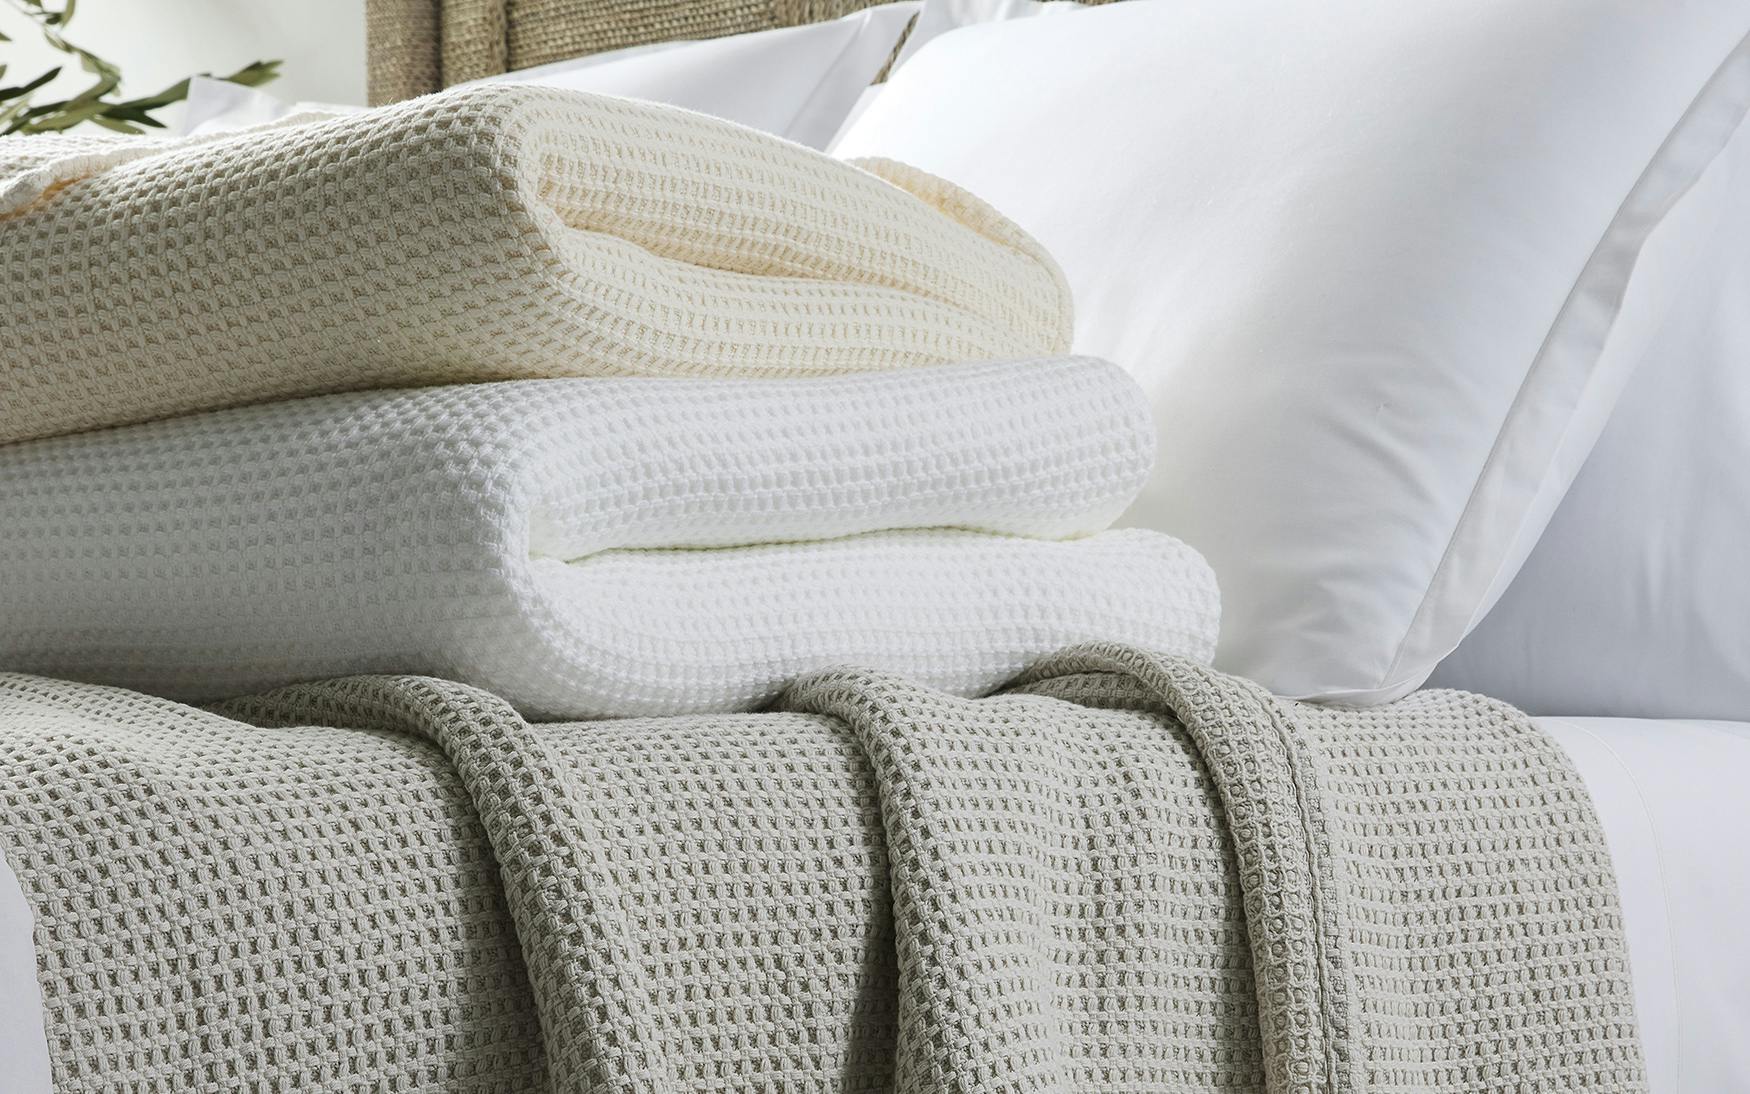 Luxury 100% Cotton Thermal Waffle-Weave Blanket w/ 2-inch White